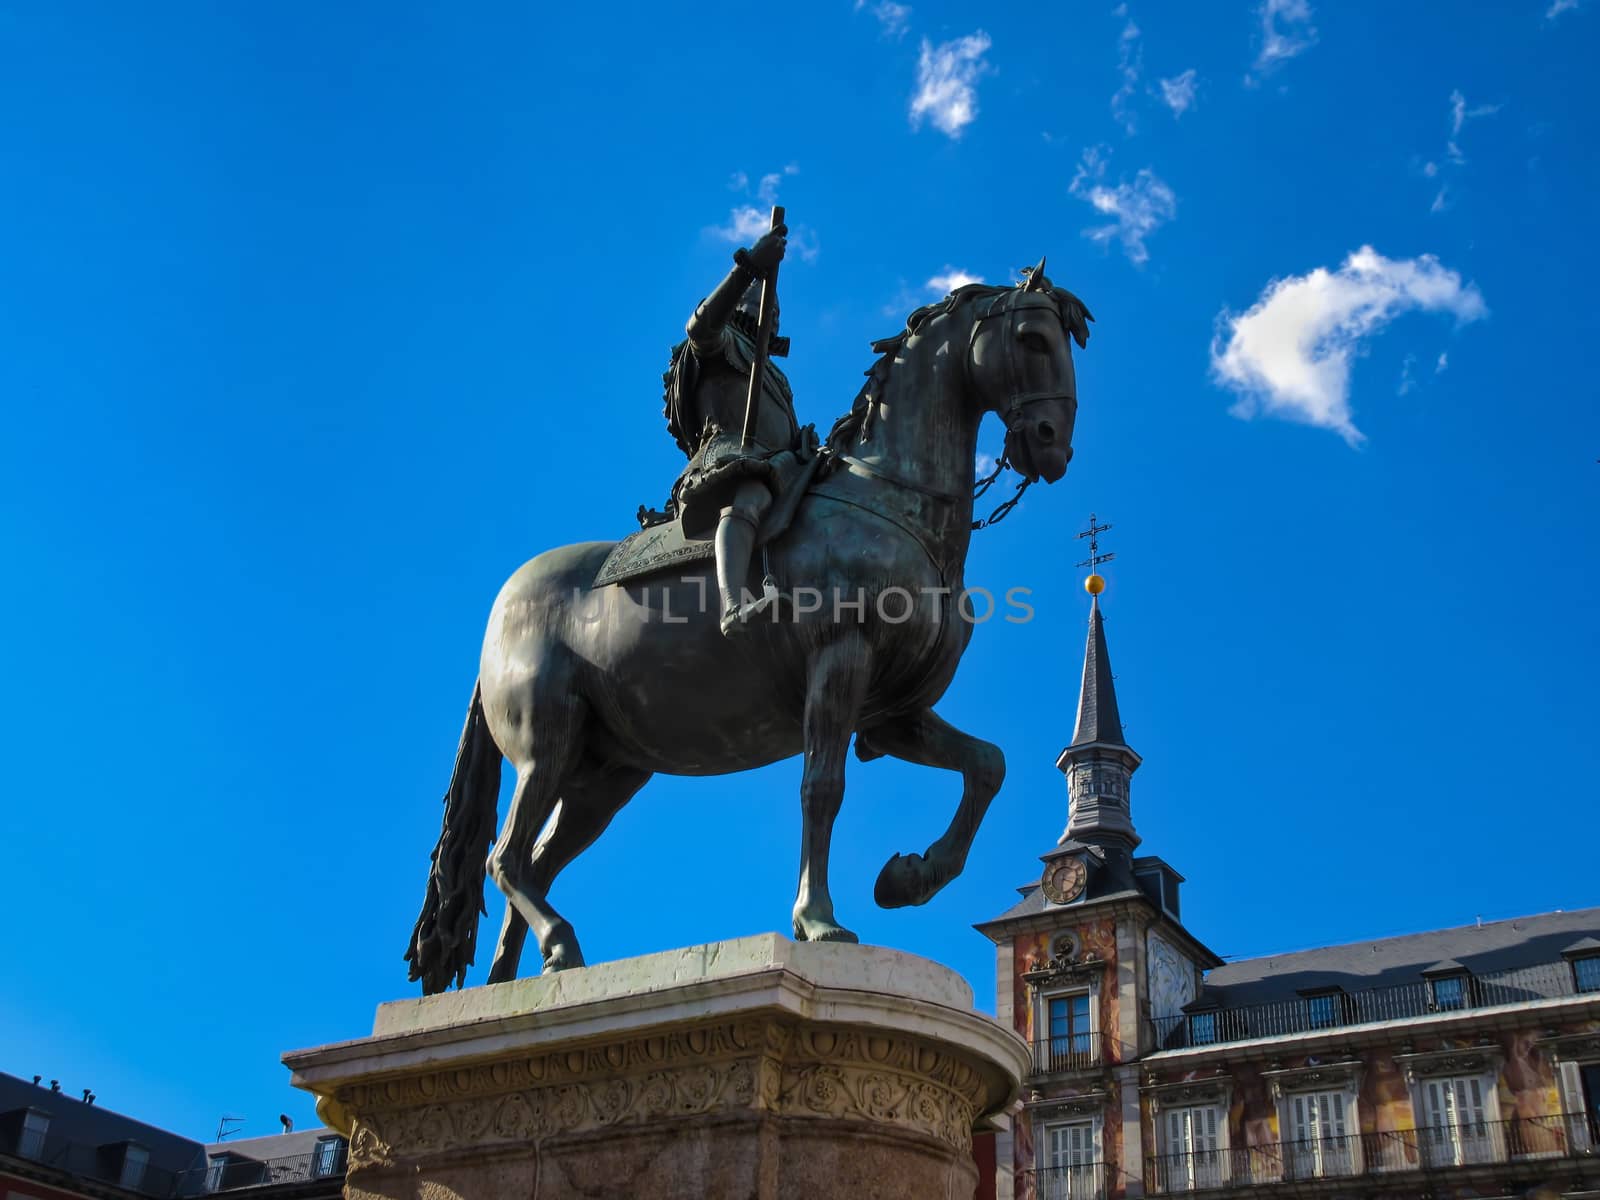 From Plaza Mayor, with a bronze statue of King Philip III at the center of the square